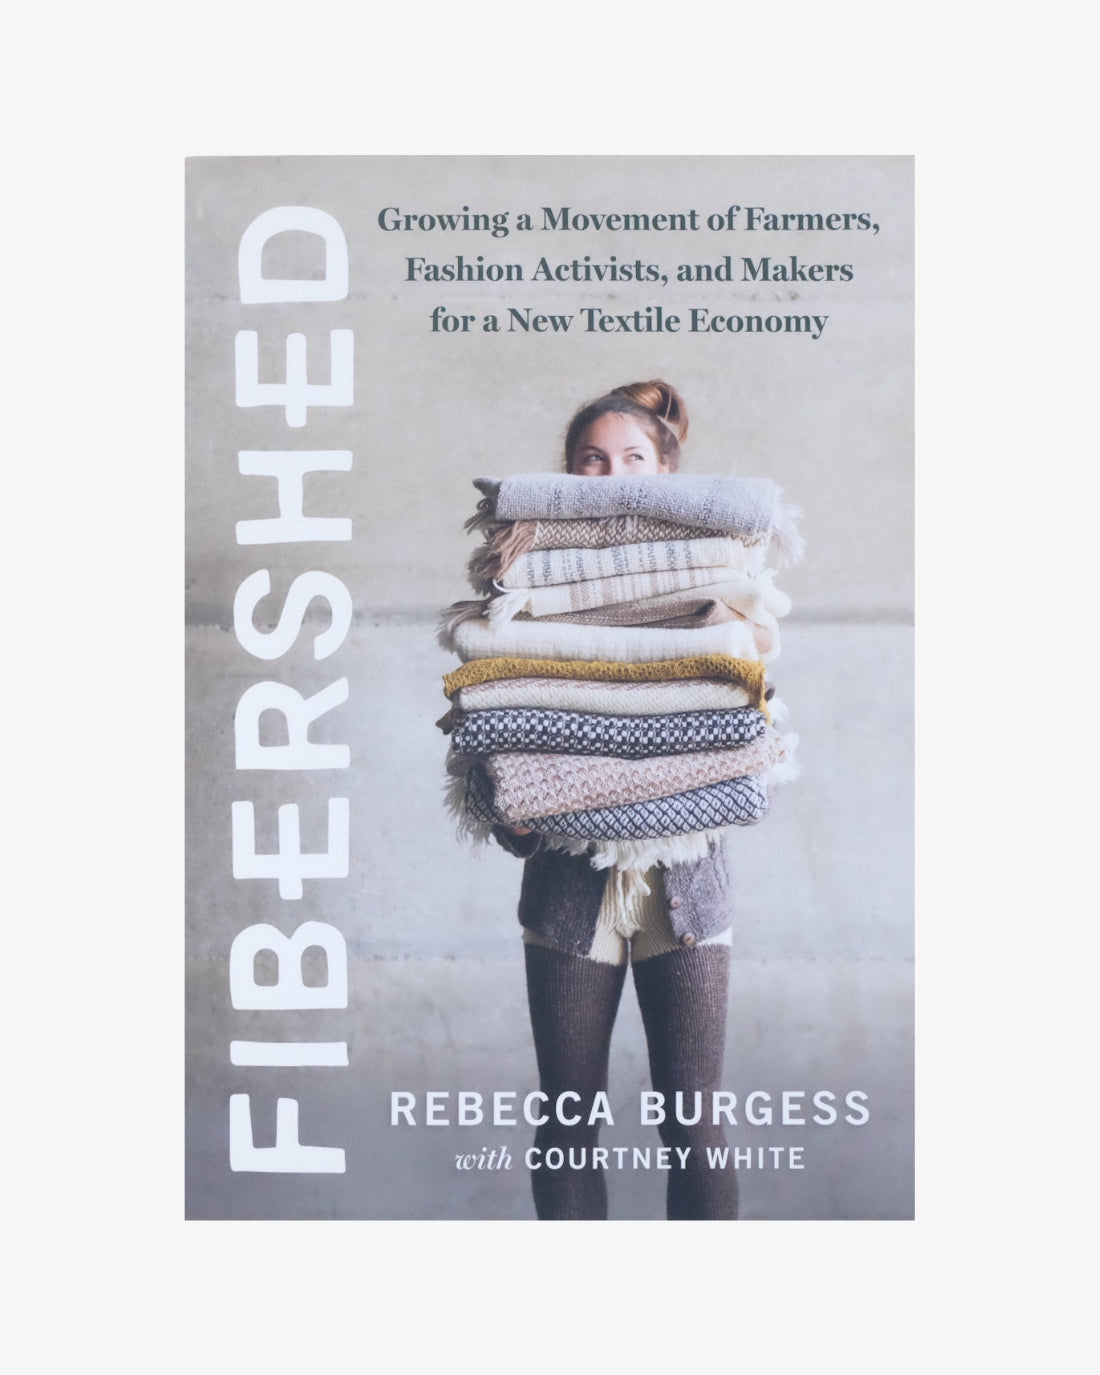 Fibershed: Growing a Movement of Farmers, Fashion Activists, and Makers for a New Textile Economy by Rebecca Burgess